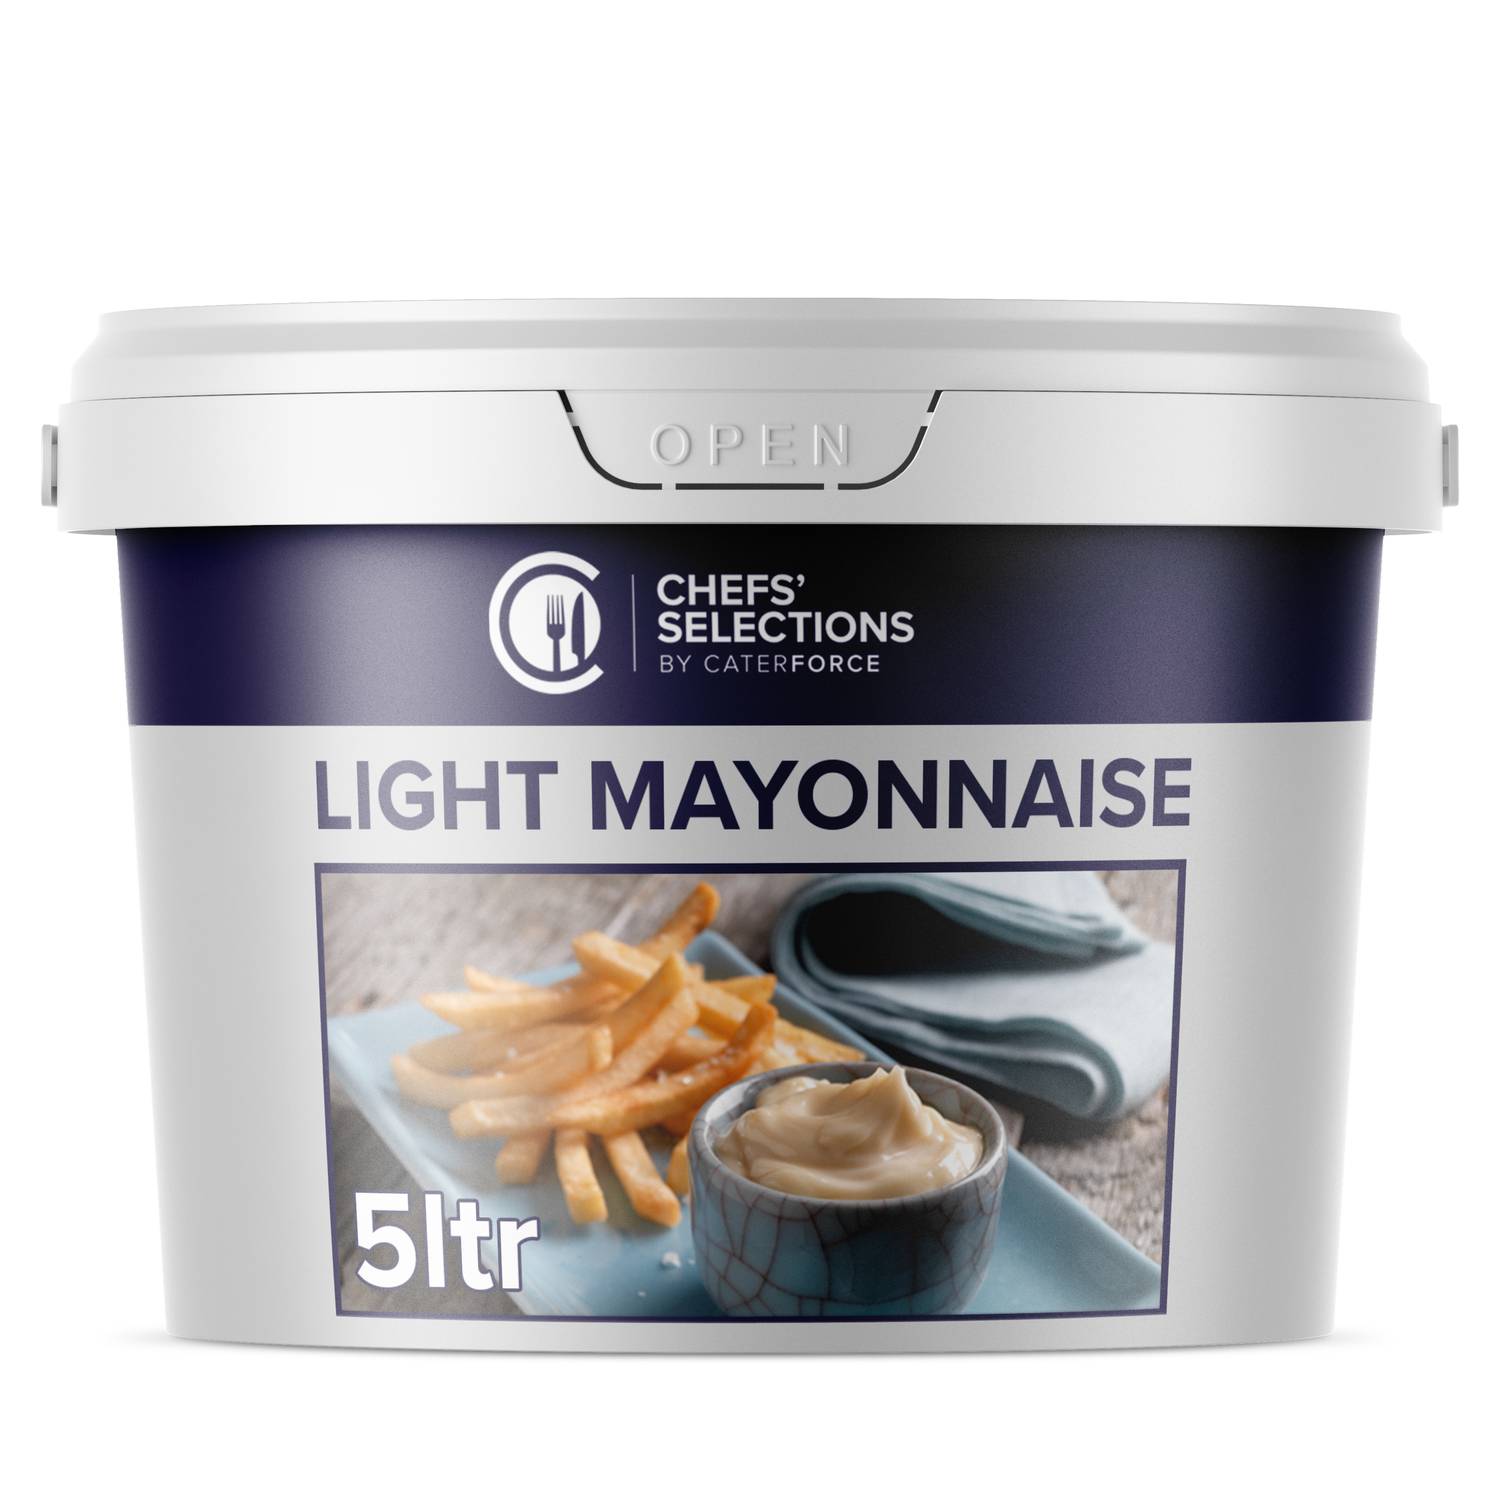 Chefs’ Selections Light Mayonnaise (1 x 5L)